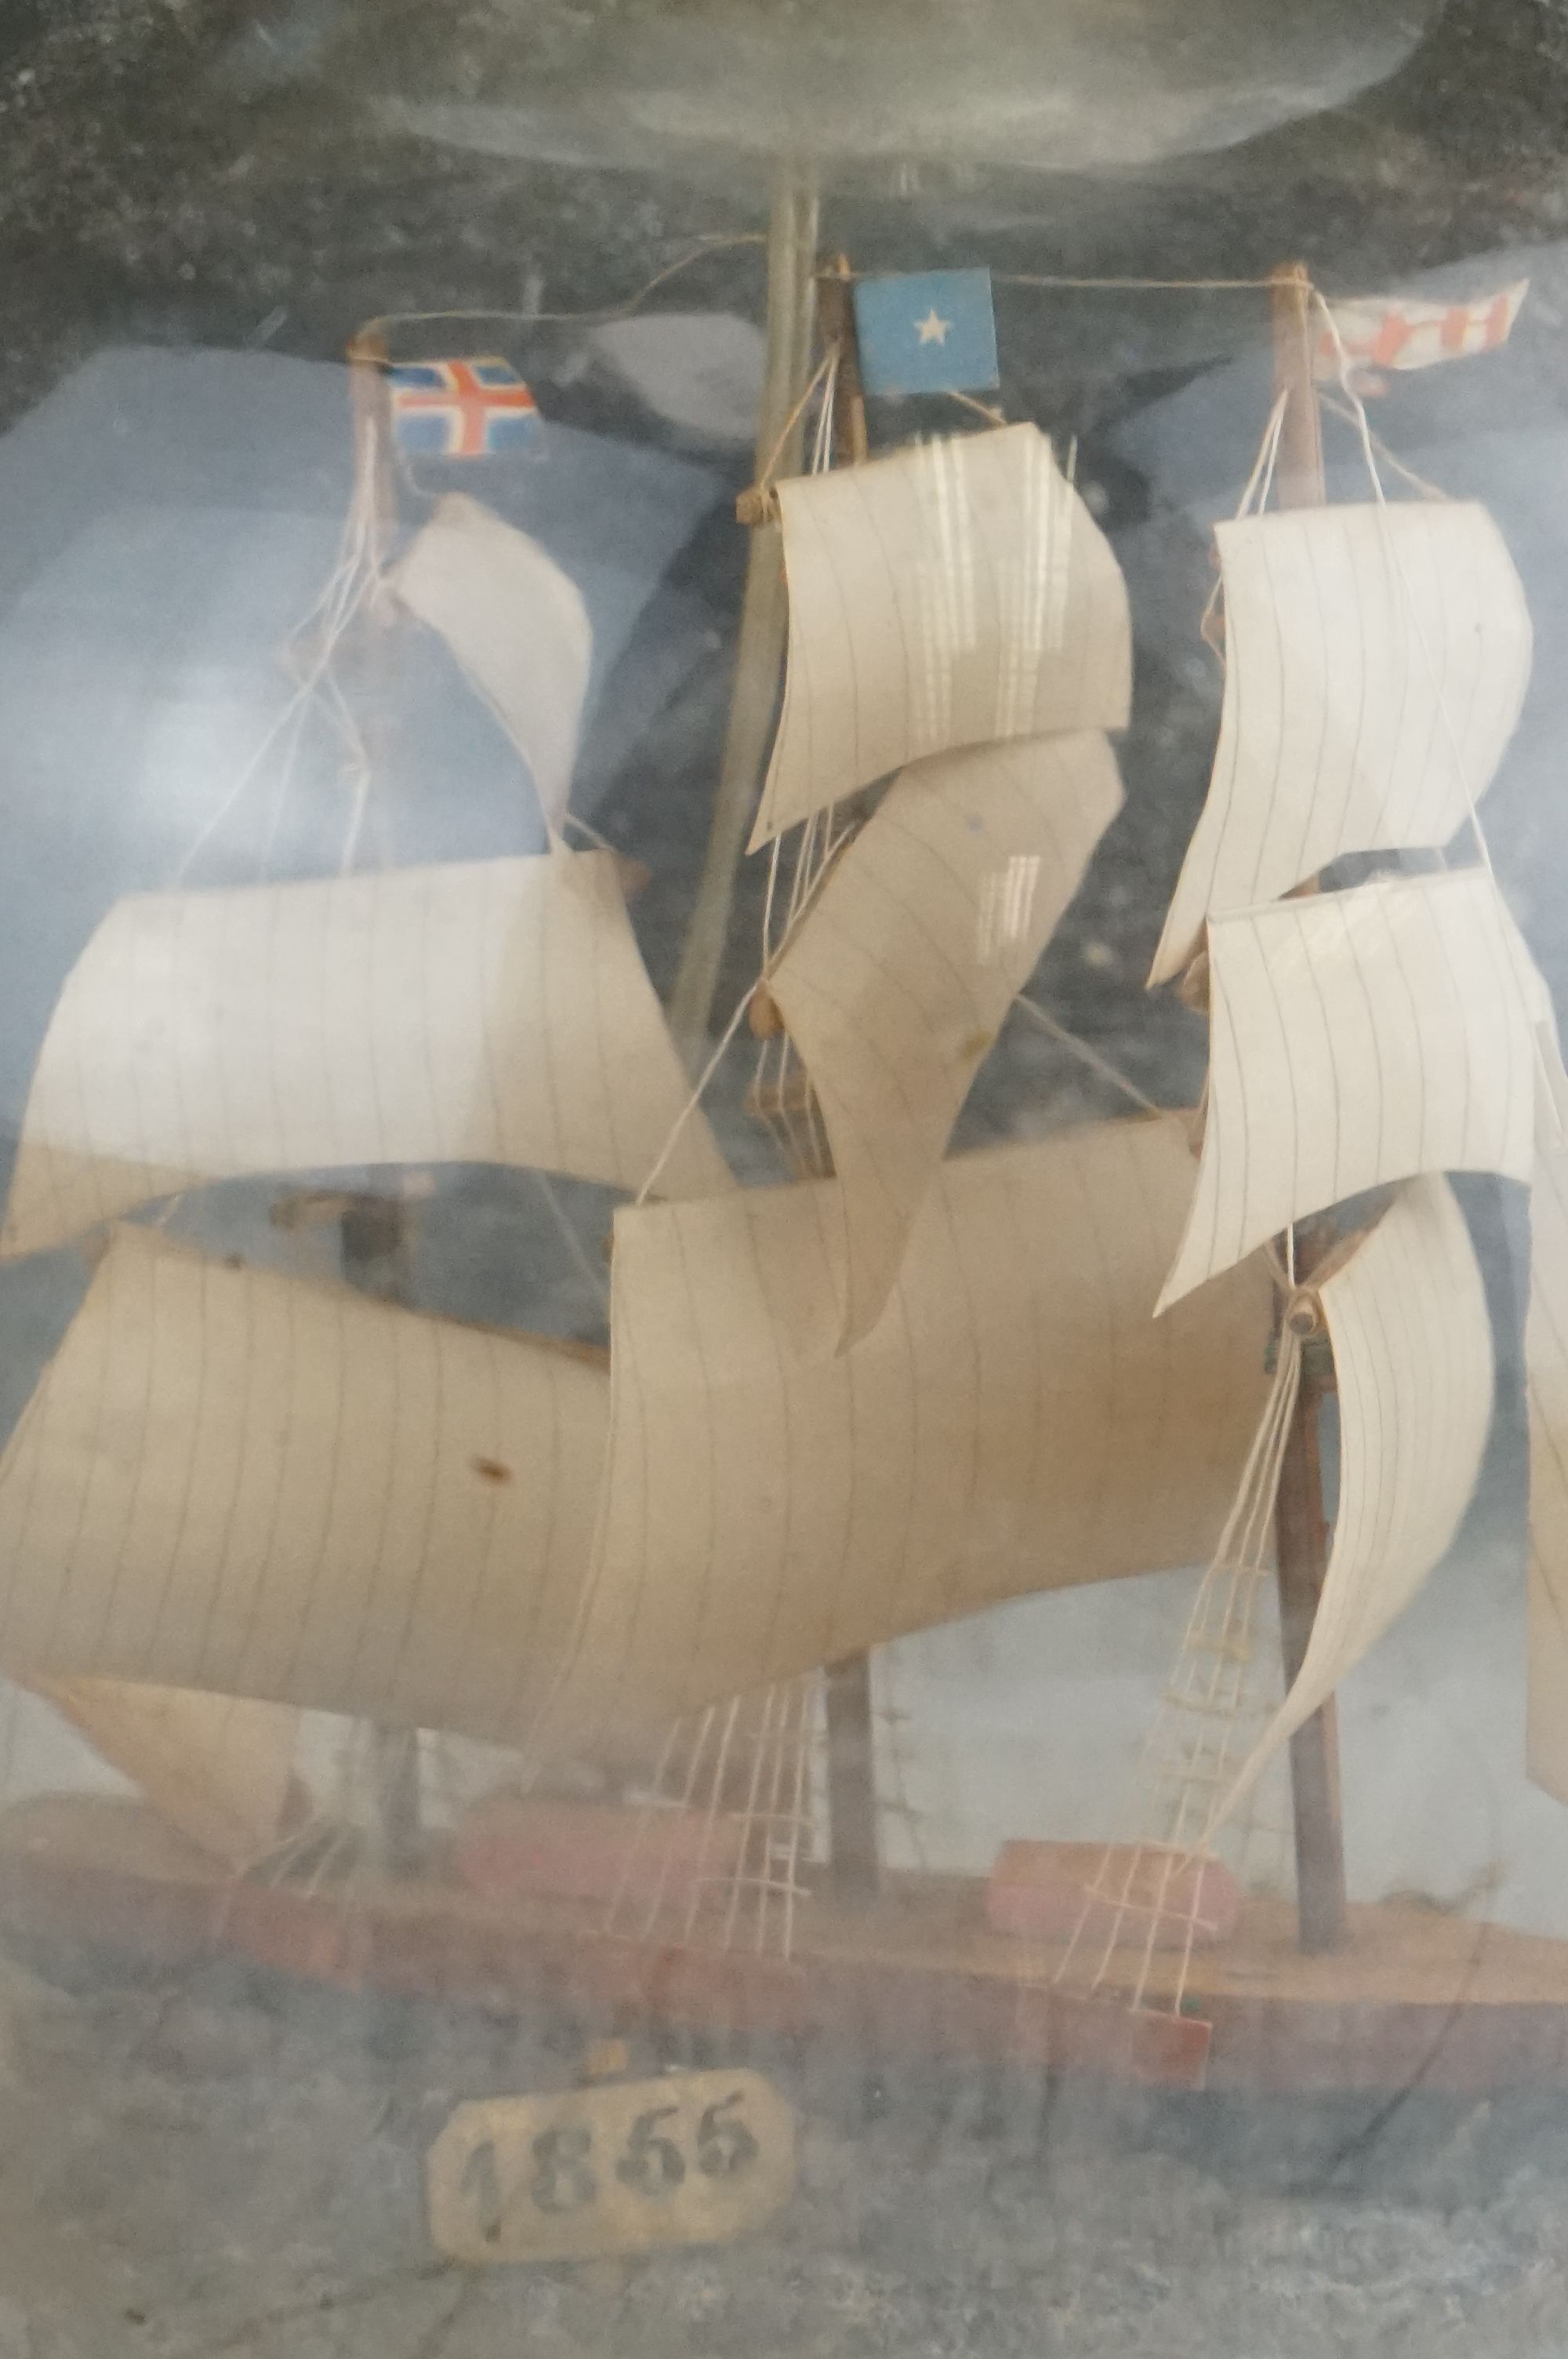 Ships in a bottle style Double gourd glass lamp with model ship to each gourd, 43 cm tall. - Image 9 of 11